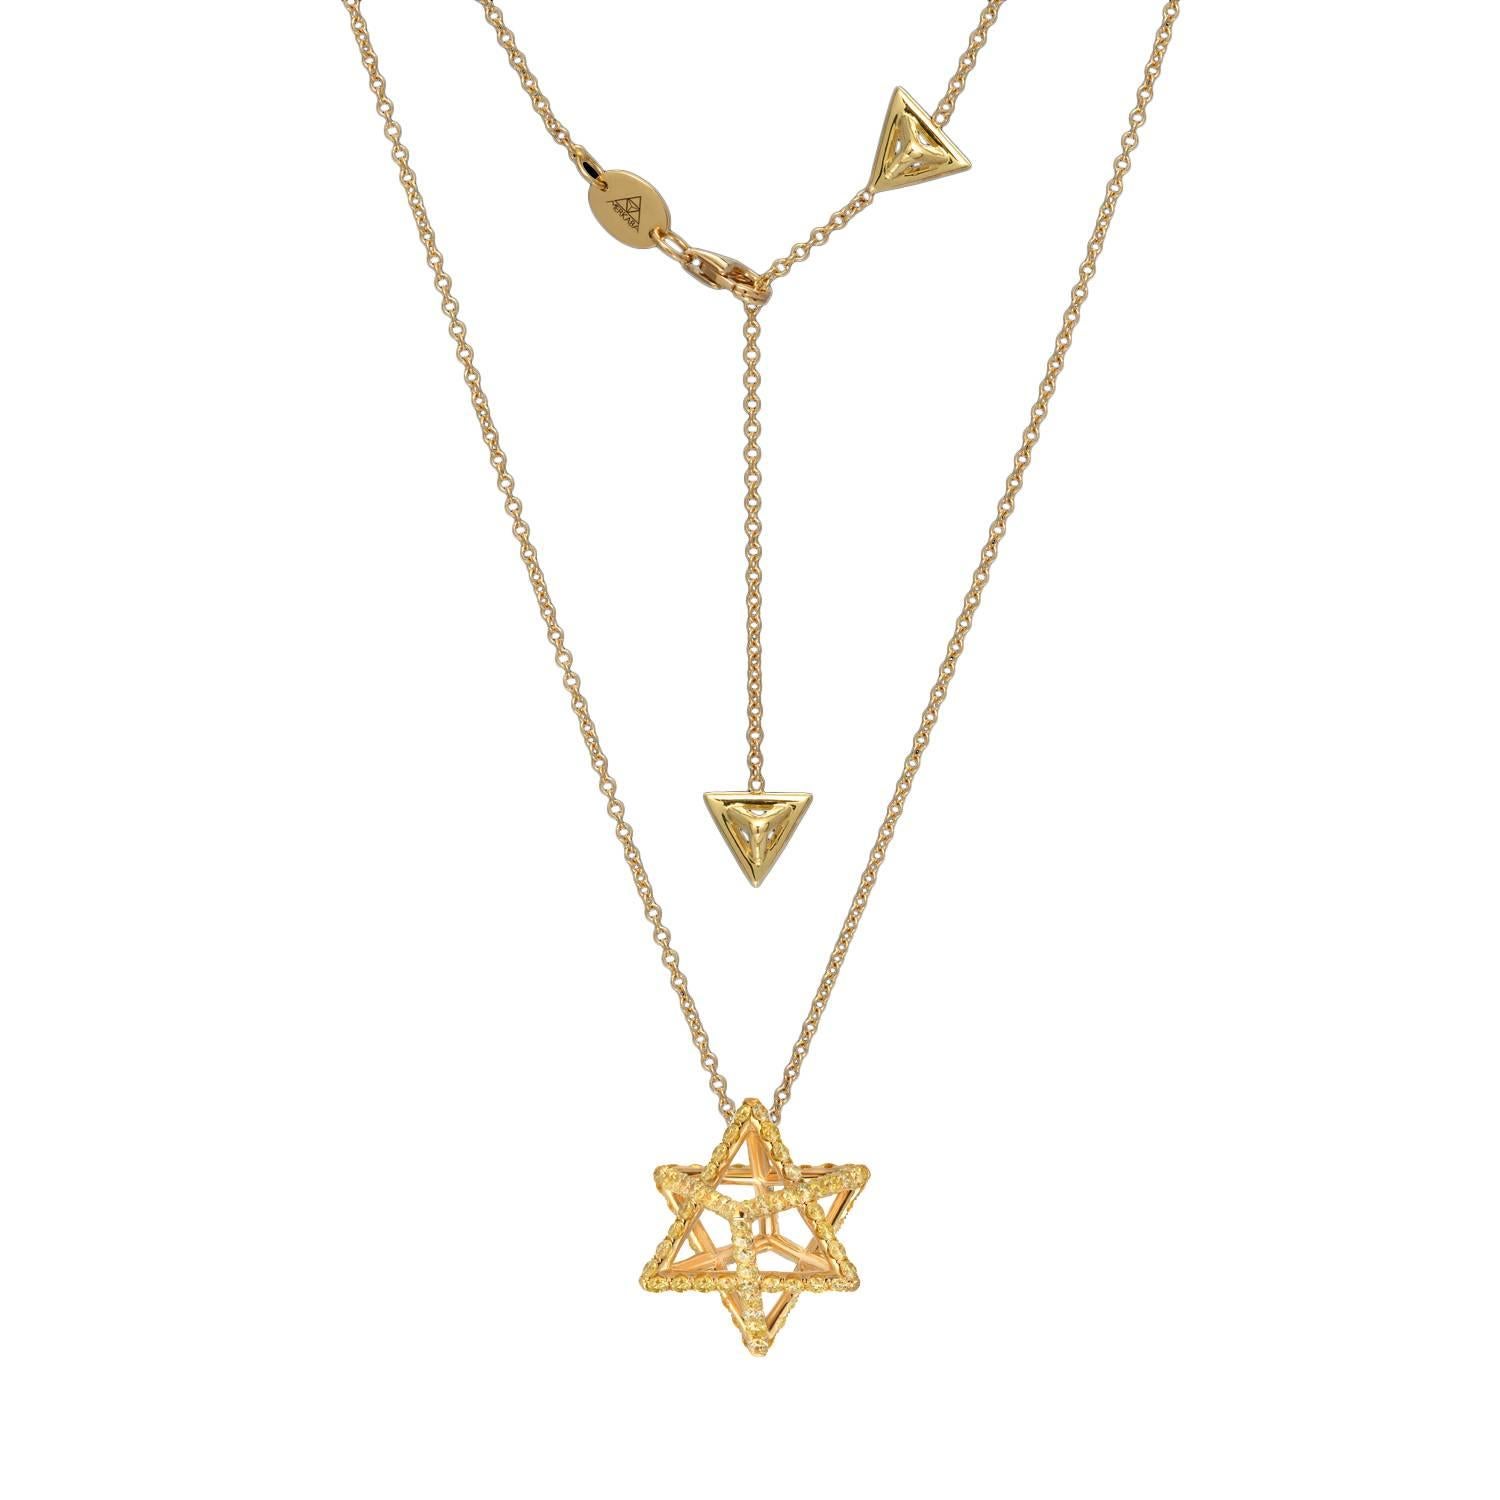 18k yellow gold necklace featuring a total of approximately 1.28 carats of fancy yellow diamonds. This heirloom-quality, sacred geometric jewelry piece, suspends elegantly at the chest, measuring 0.68”, a three-dimensional symbol of universal light.